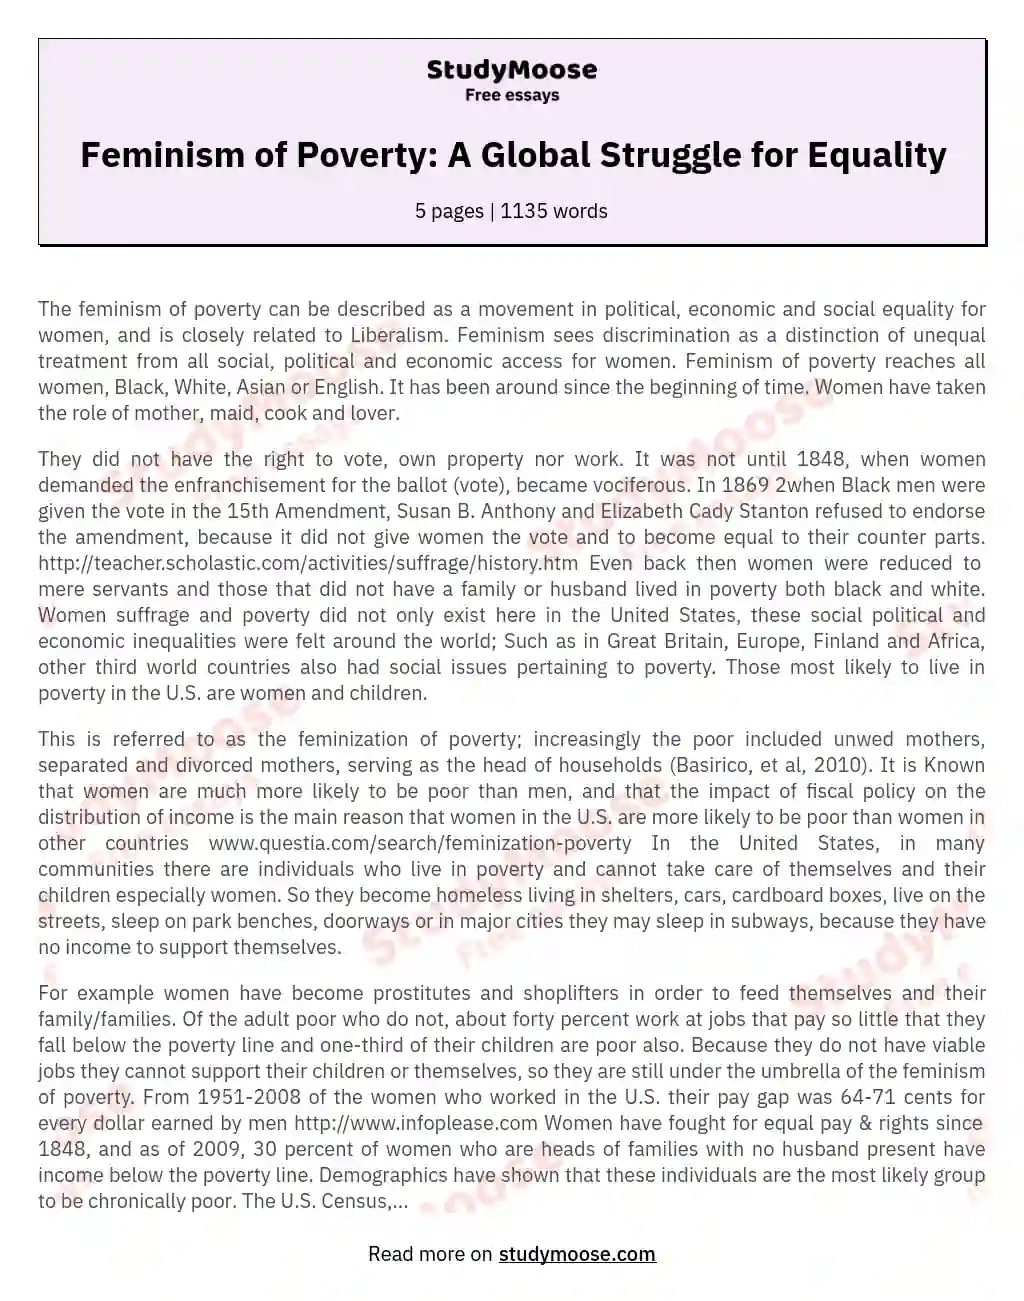 Feminism of Poverty: A Global Struggle for Equality essay